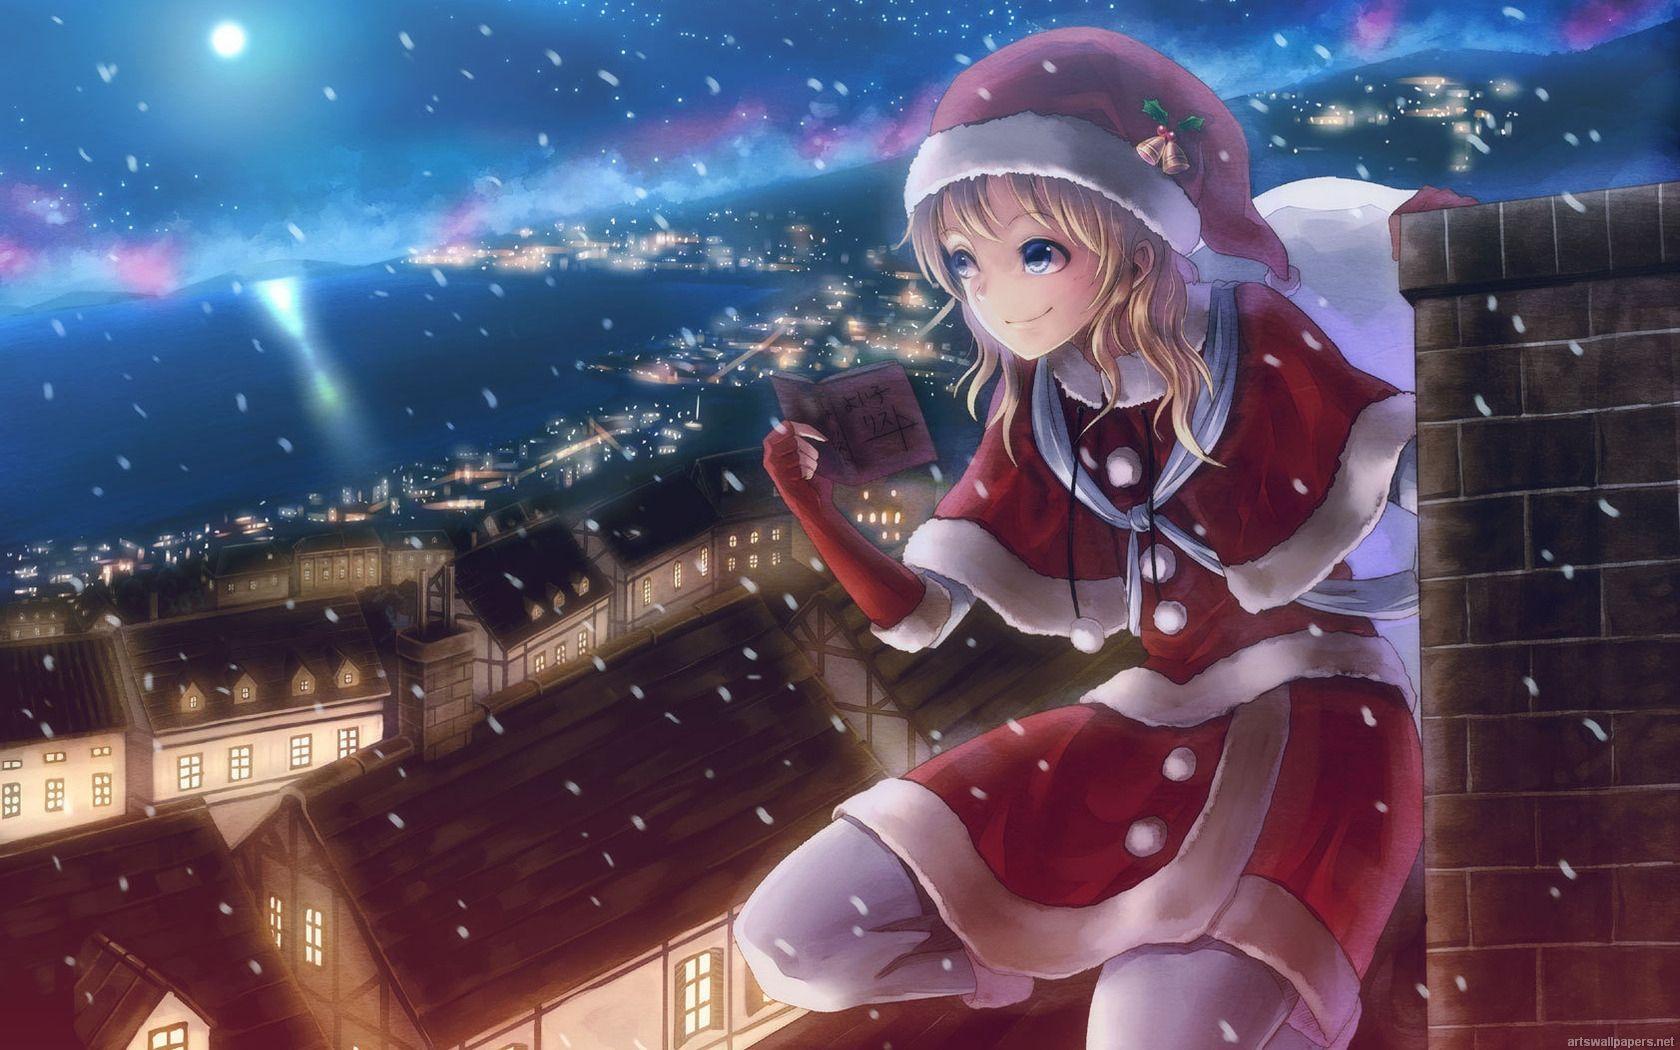 Pin by 𝙸𝙲𝙾𝙽𝚂 (𝙿𝙵𝙿) on Anime couple matching pfp | Christmas couple  pictures, New year anime, Christmas profile pics aesthetic anime